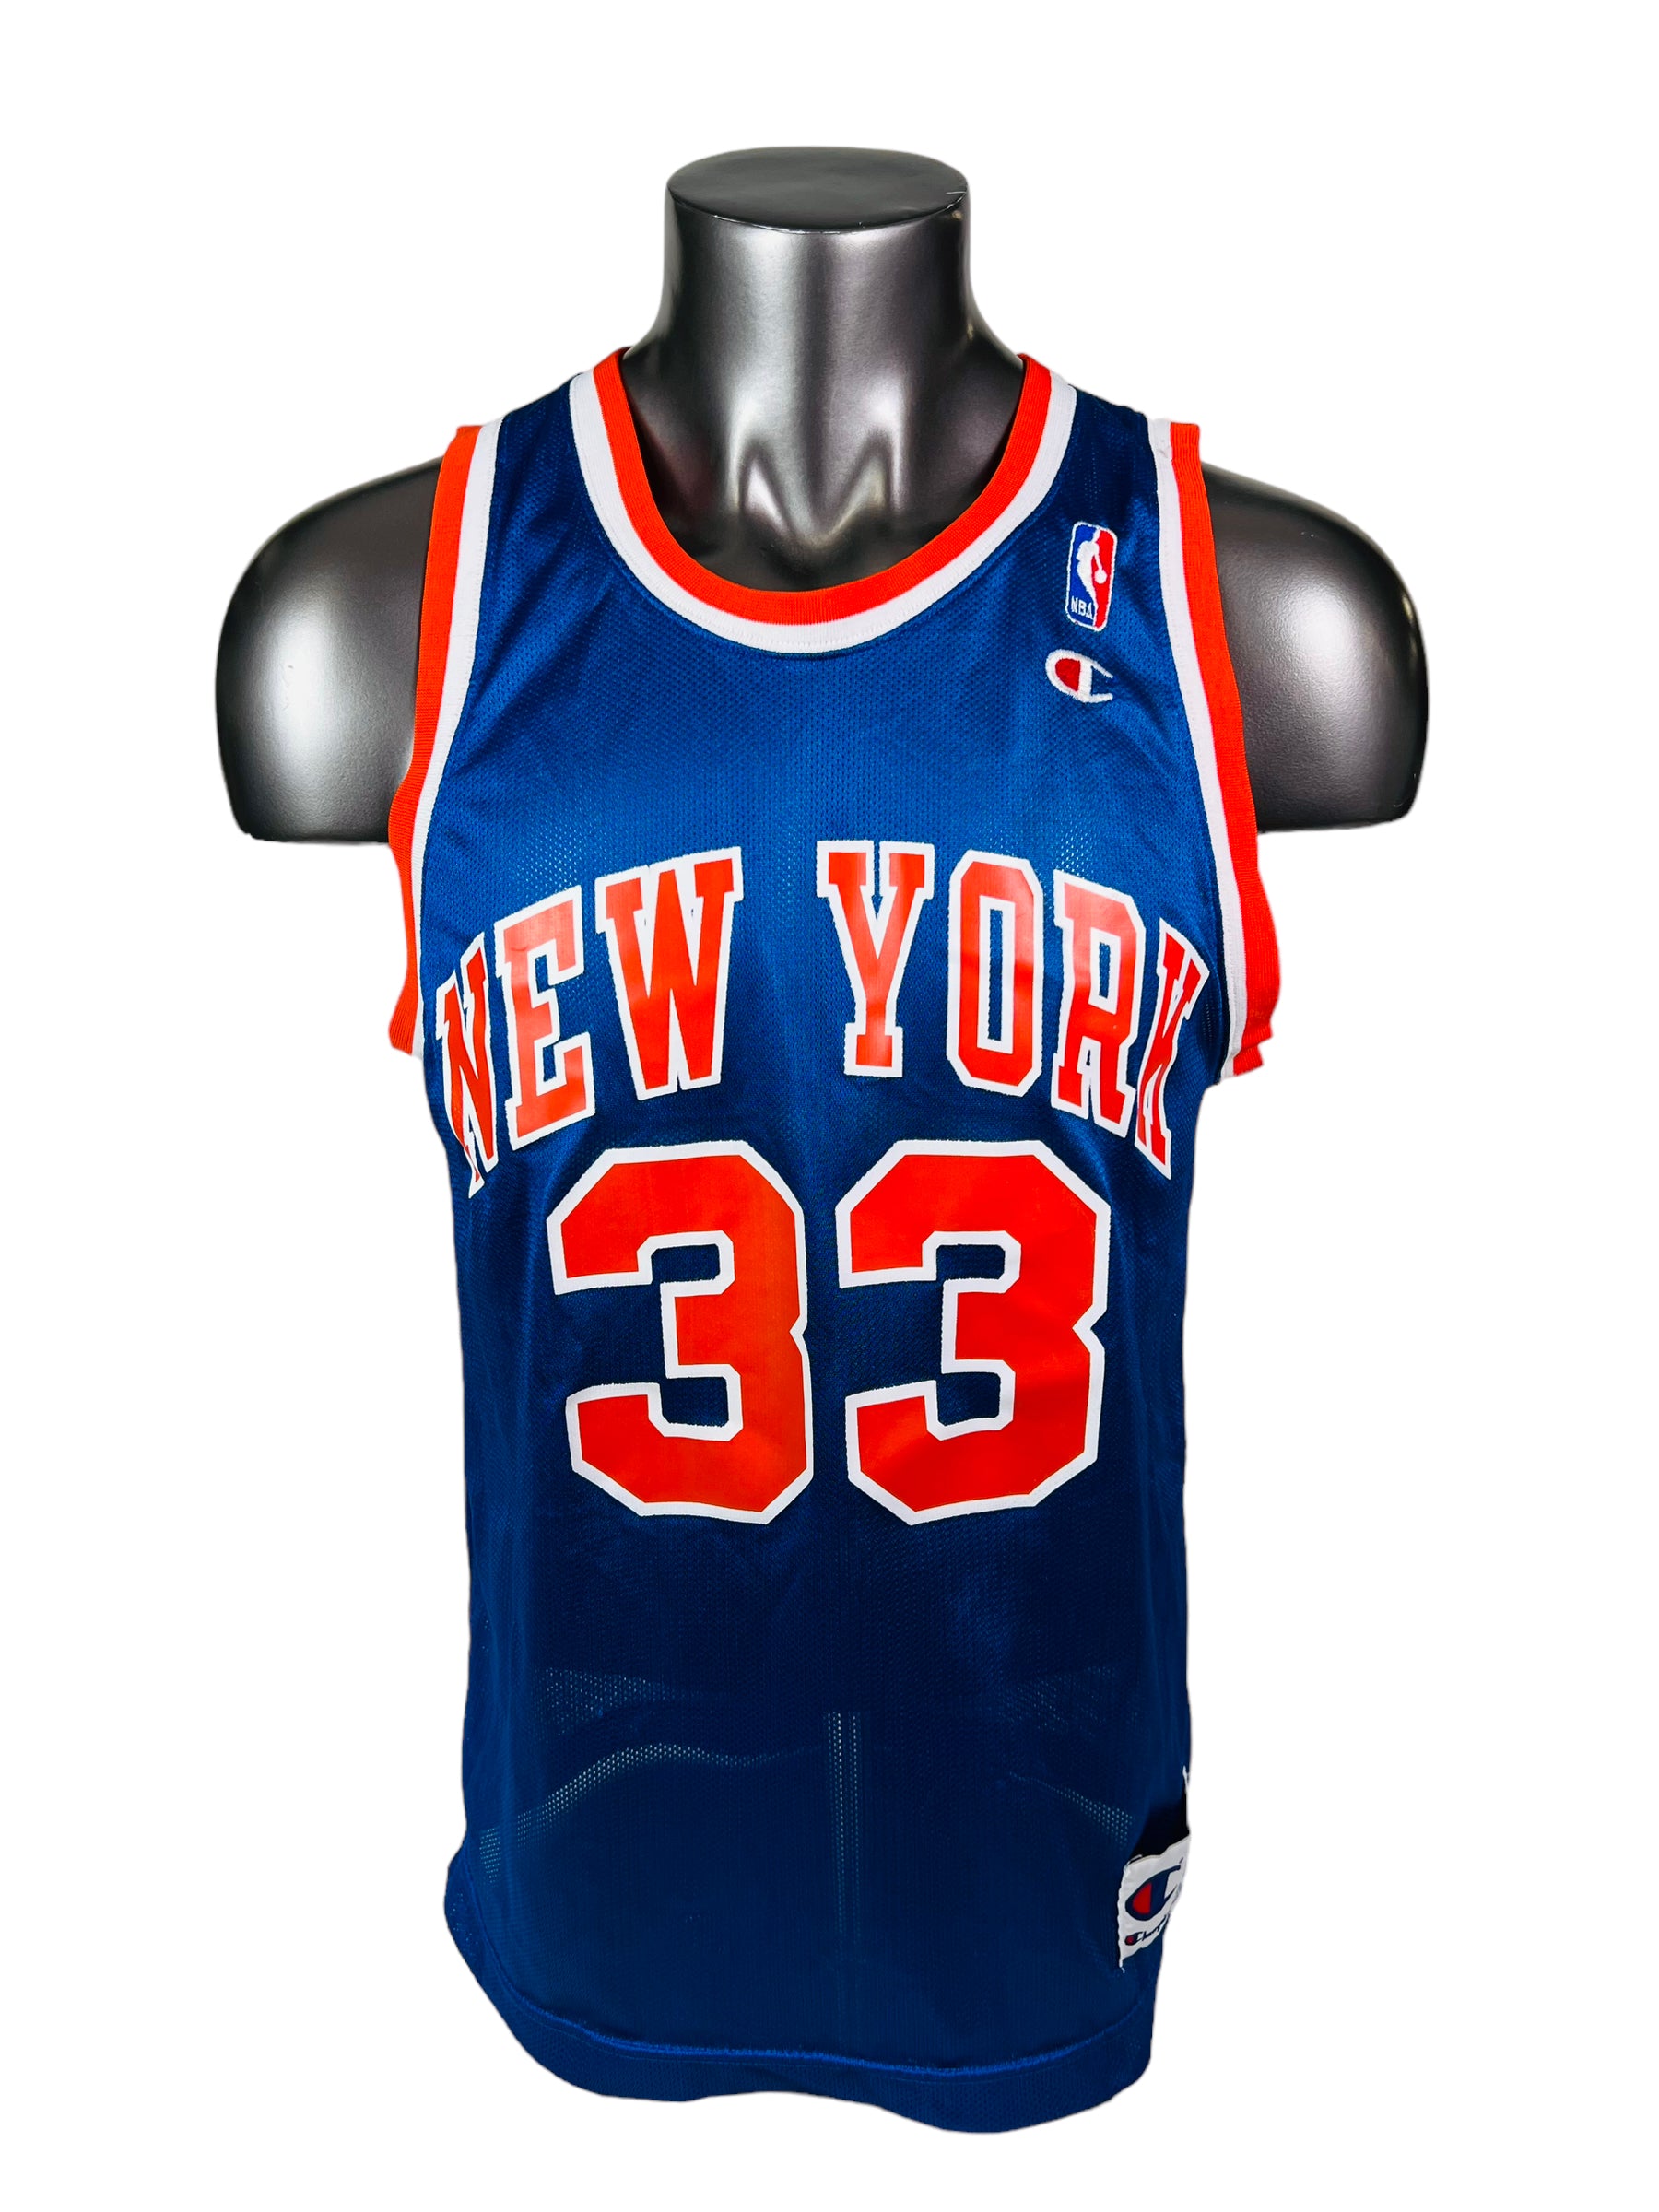 New York Knicks Patrick Ewing Autographed Blue Authentic Mitchell